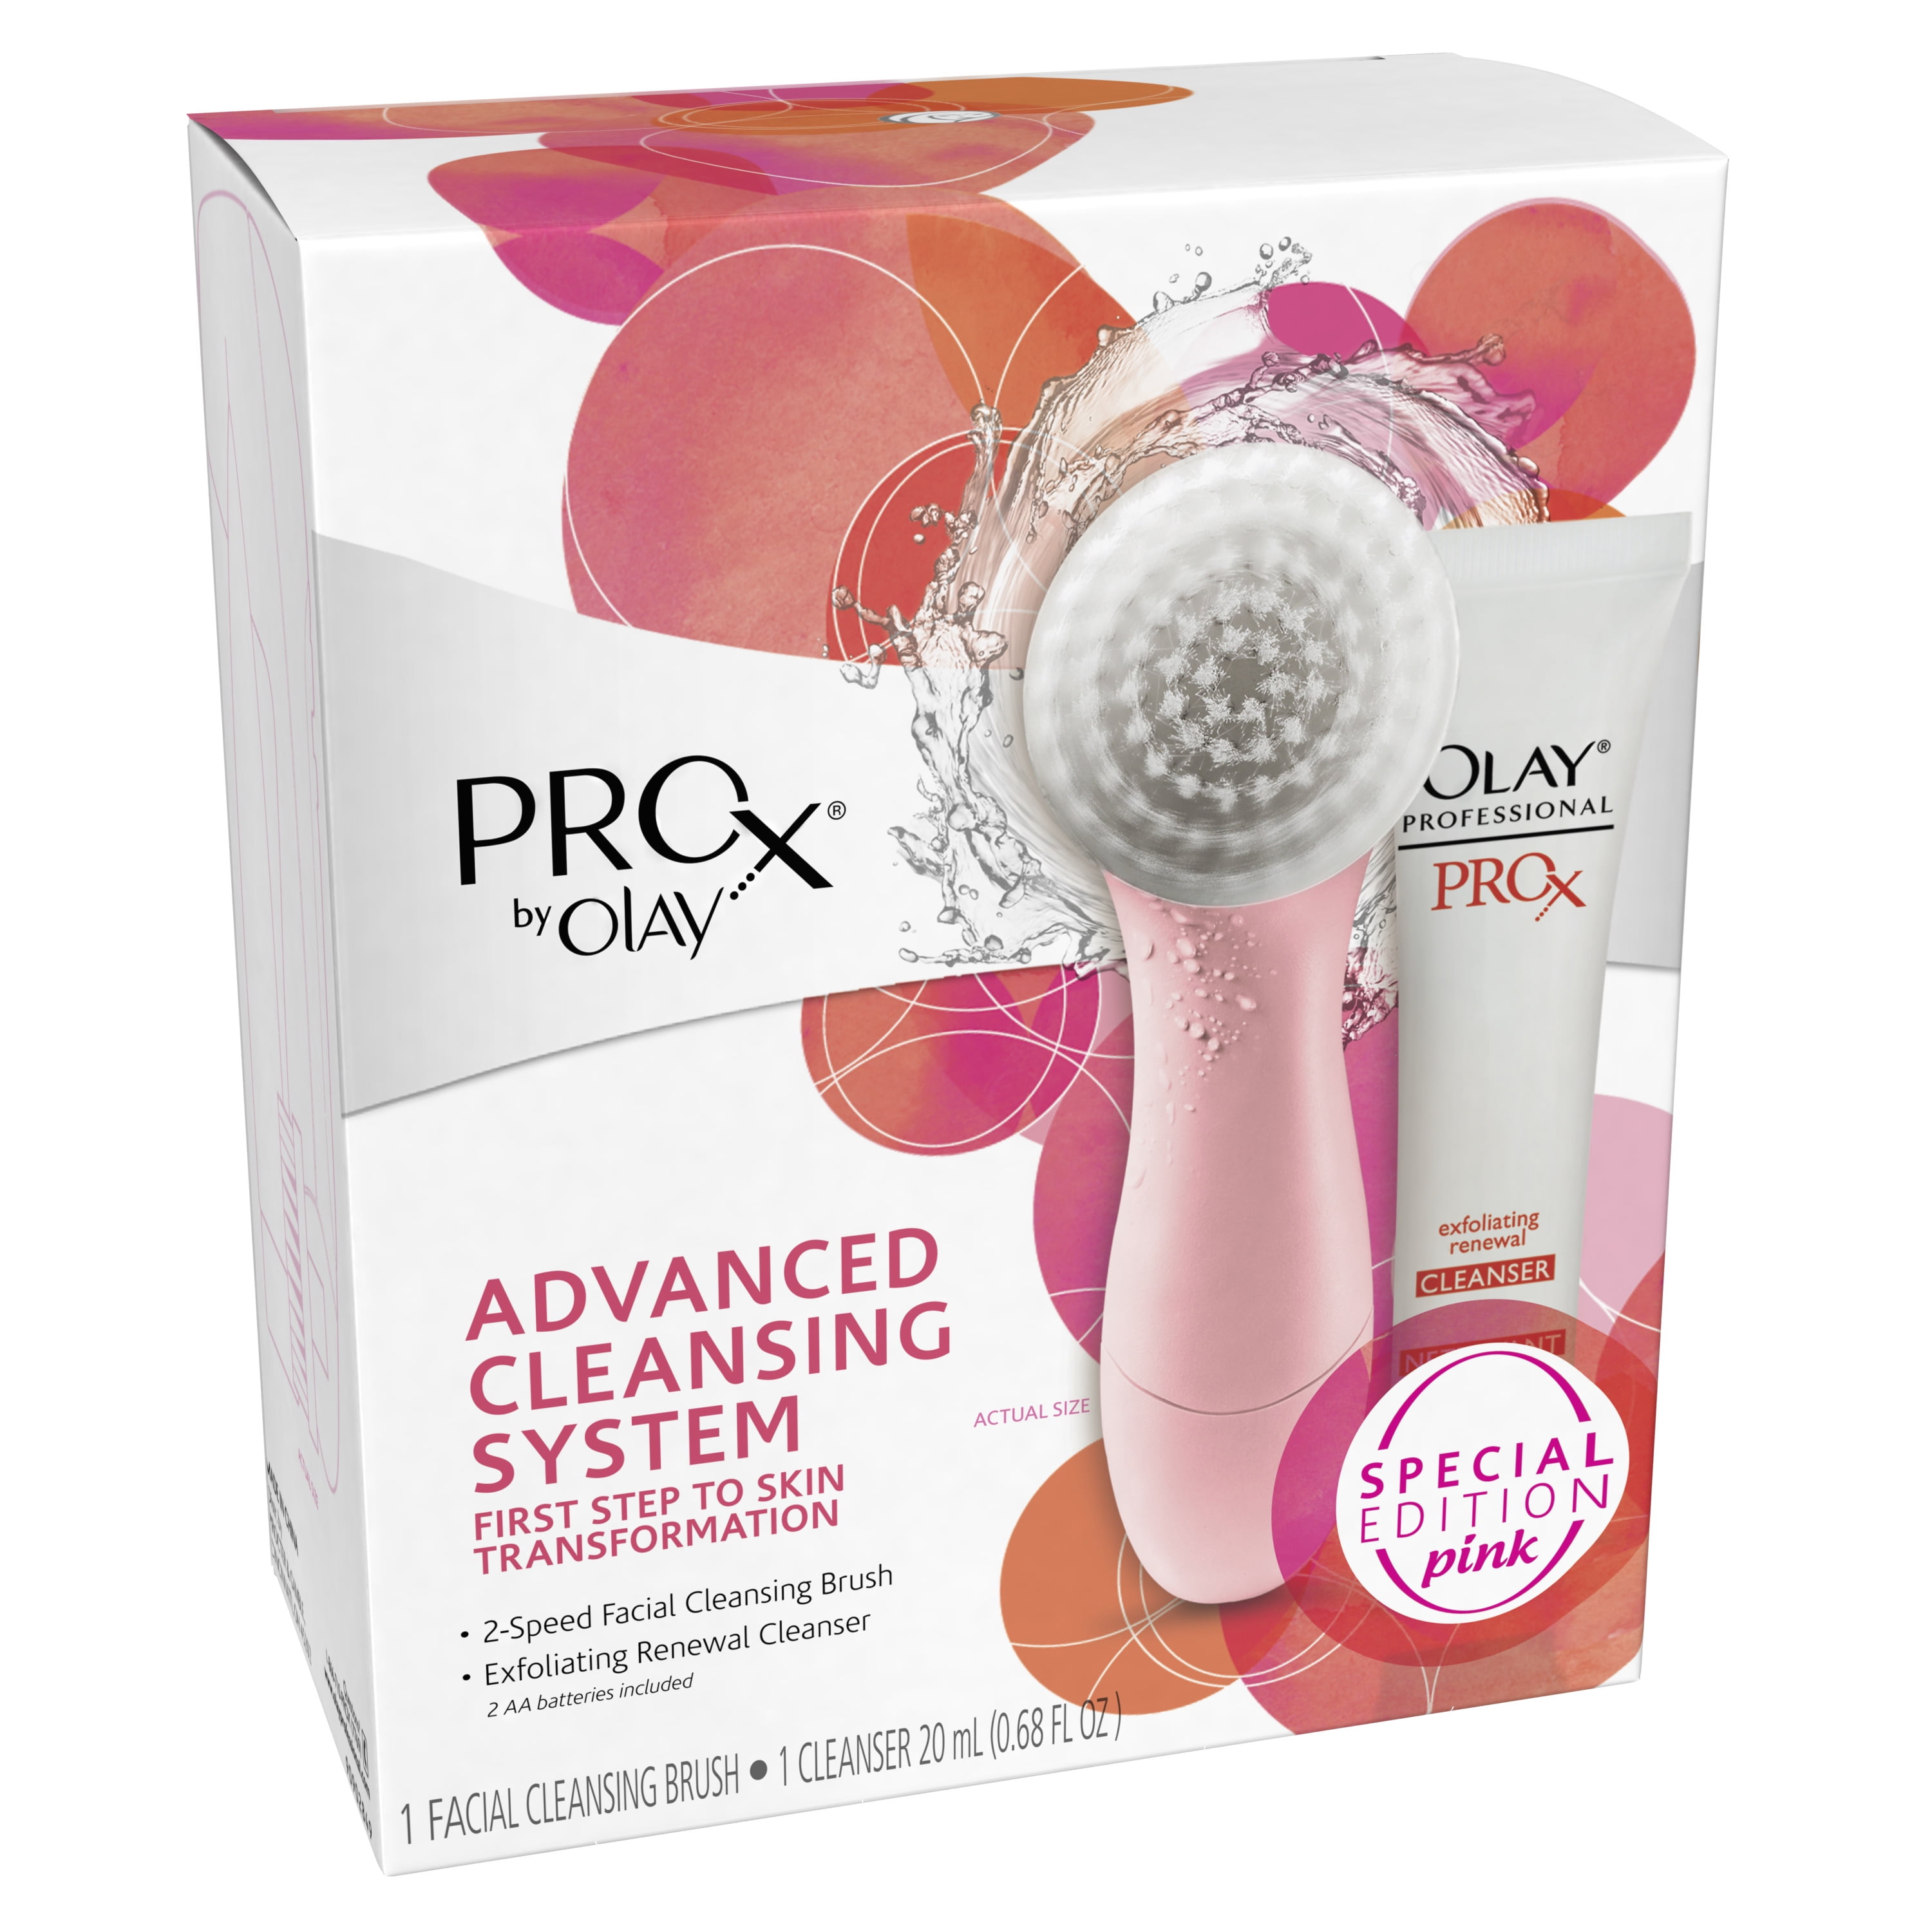 Olay ProX by Olay Facial Cleansing Brush System - Walmart.com